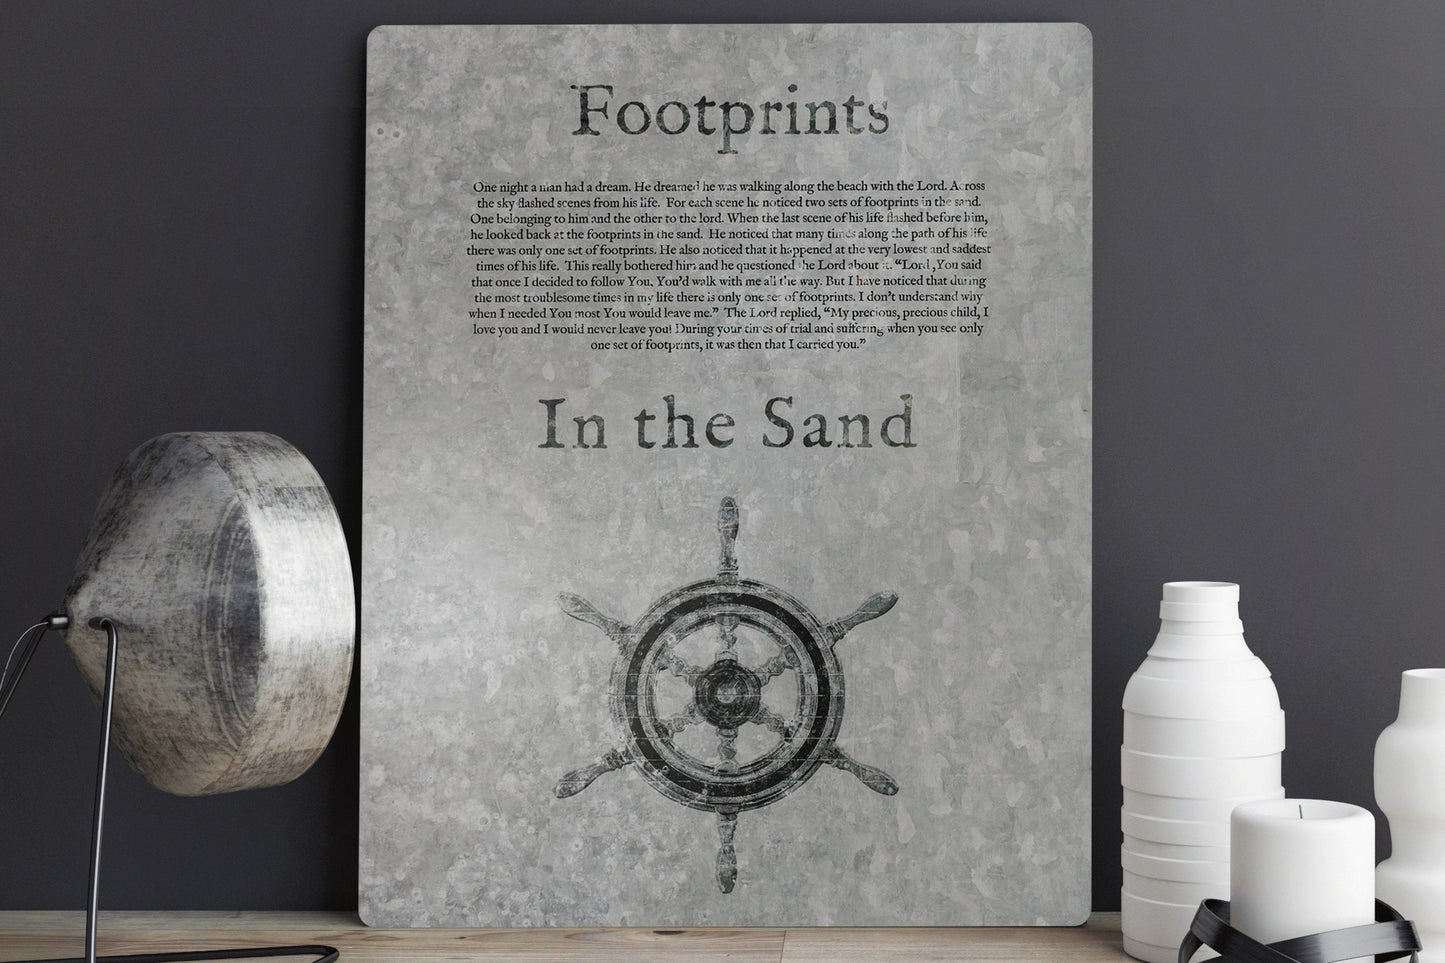 Footprints in the Sand, Galvanized Metal Sign, Footprints Poem, for Him, Christian Decor, Religious Art for Beach house, Gift, Christian Men